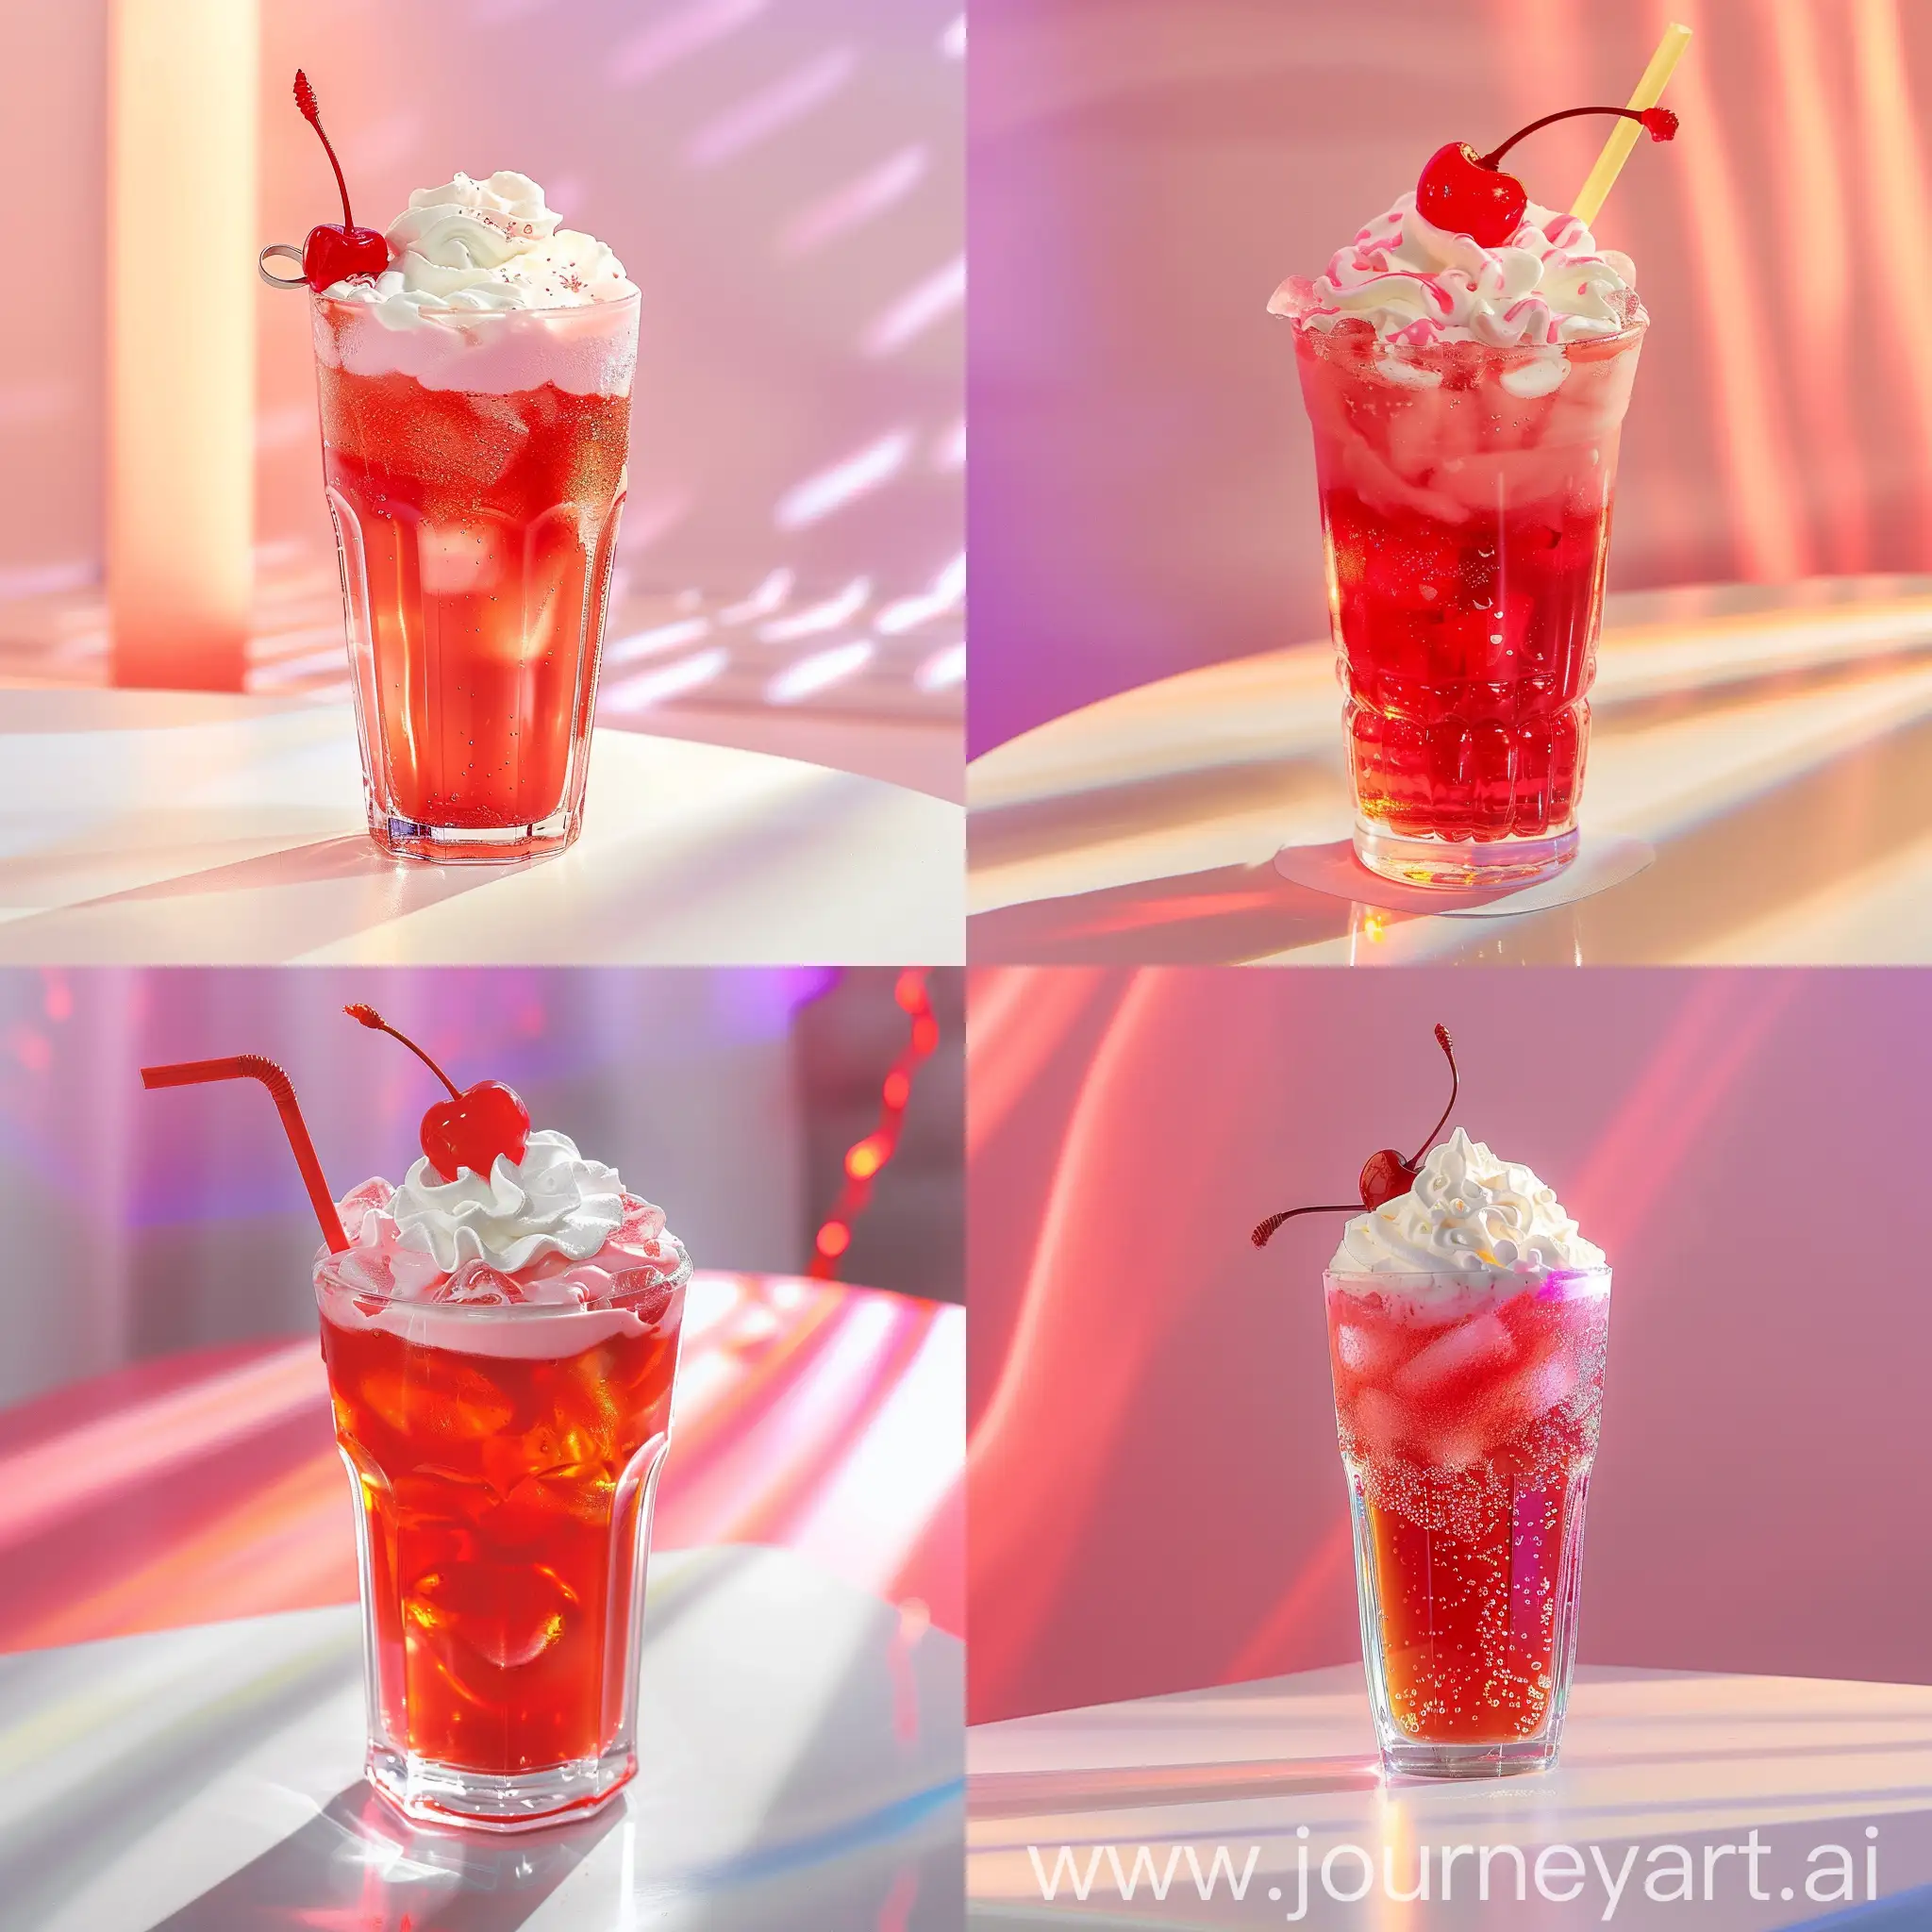 Aesthetic instagram picture real life, red iced soda in glass on white table with whipped cream on top and a cherry, pastel lighting